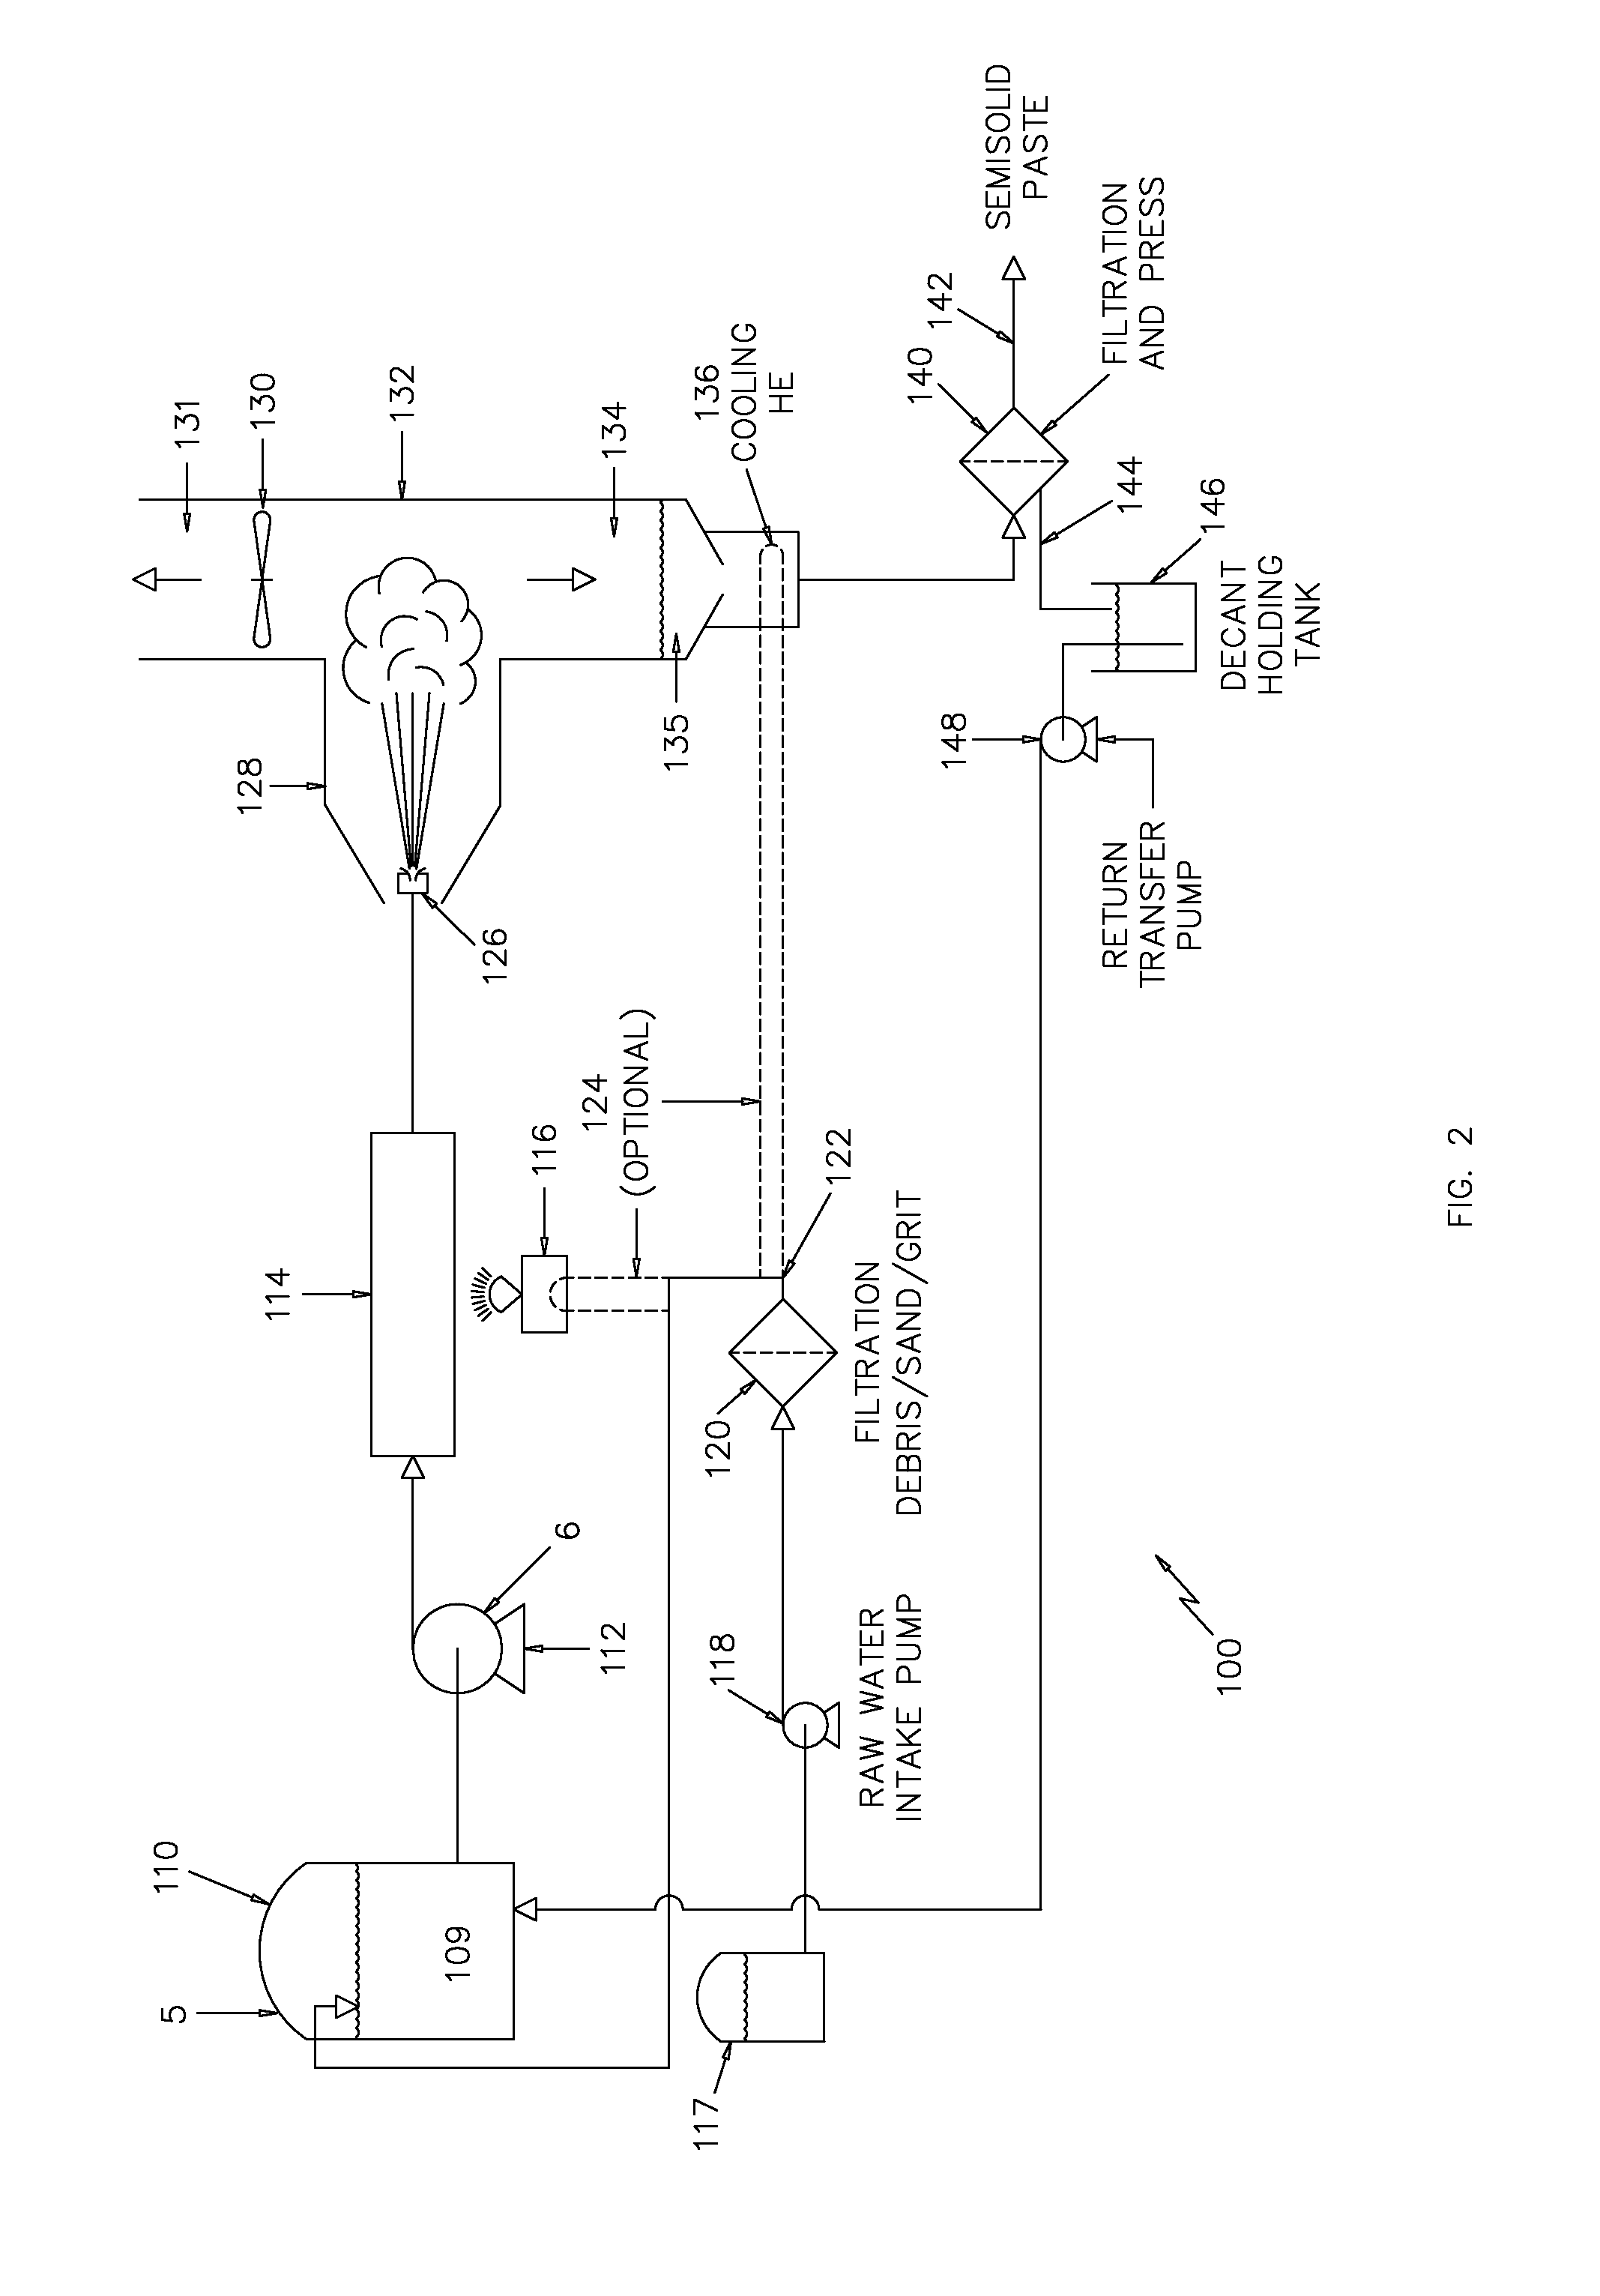 Device and Process for Removing Contaminants from a Fluid Using Electromagnetic Energy